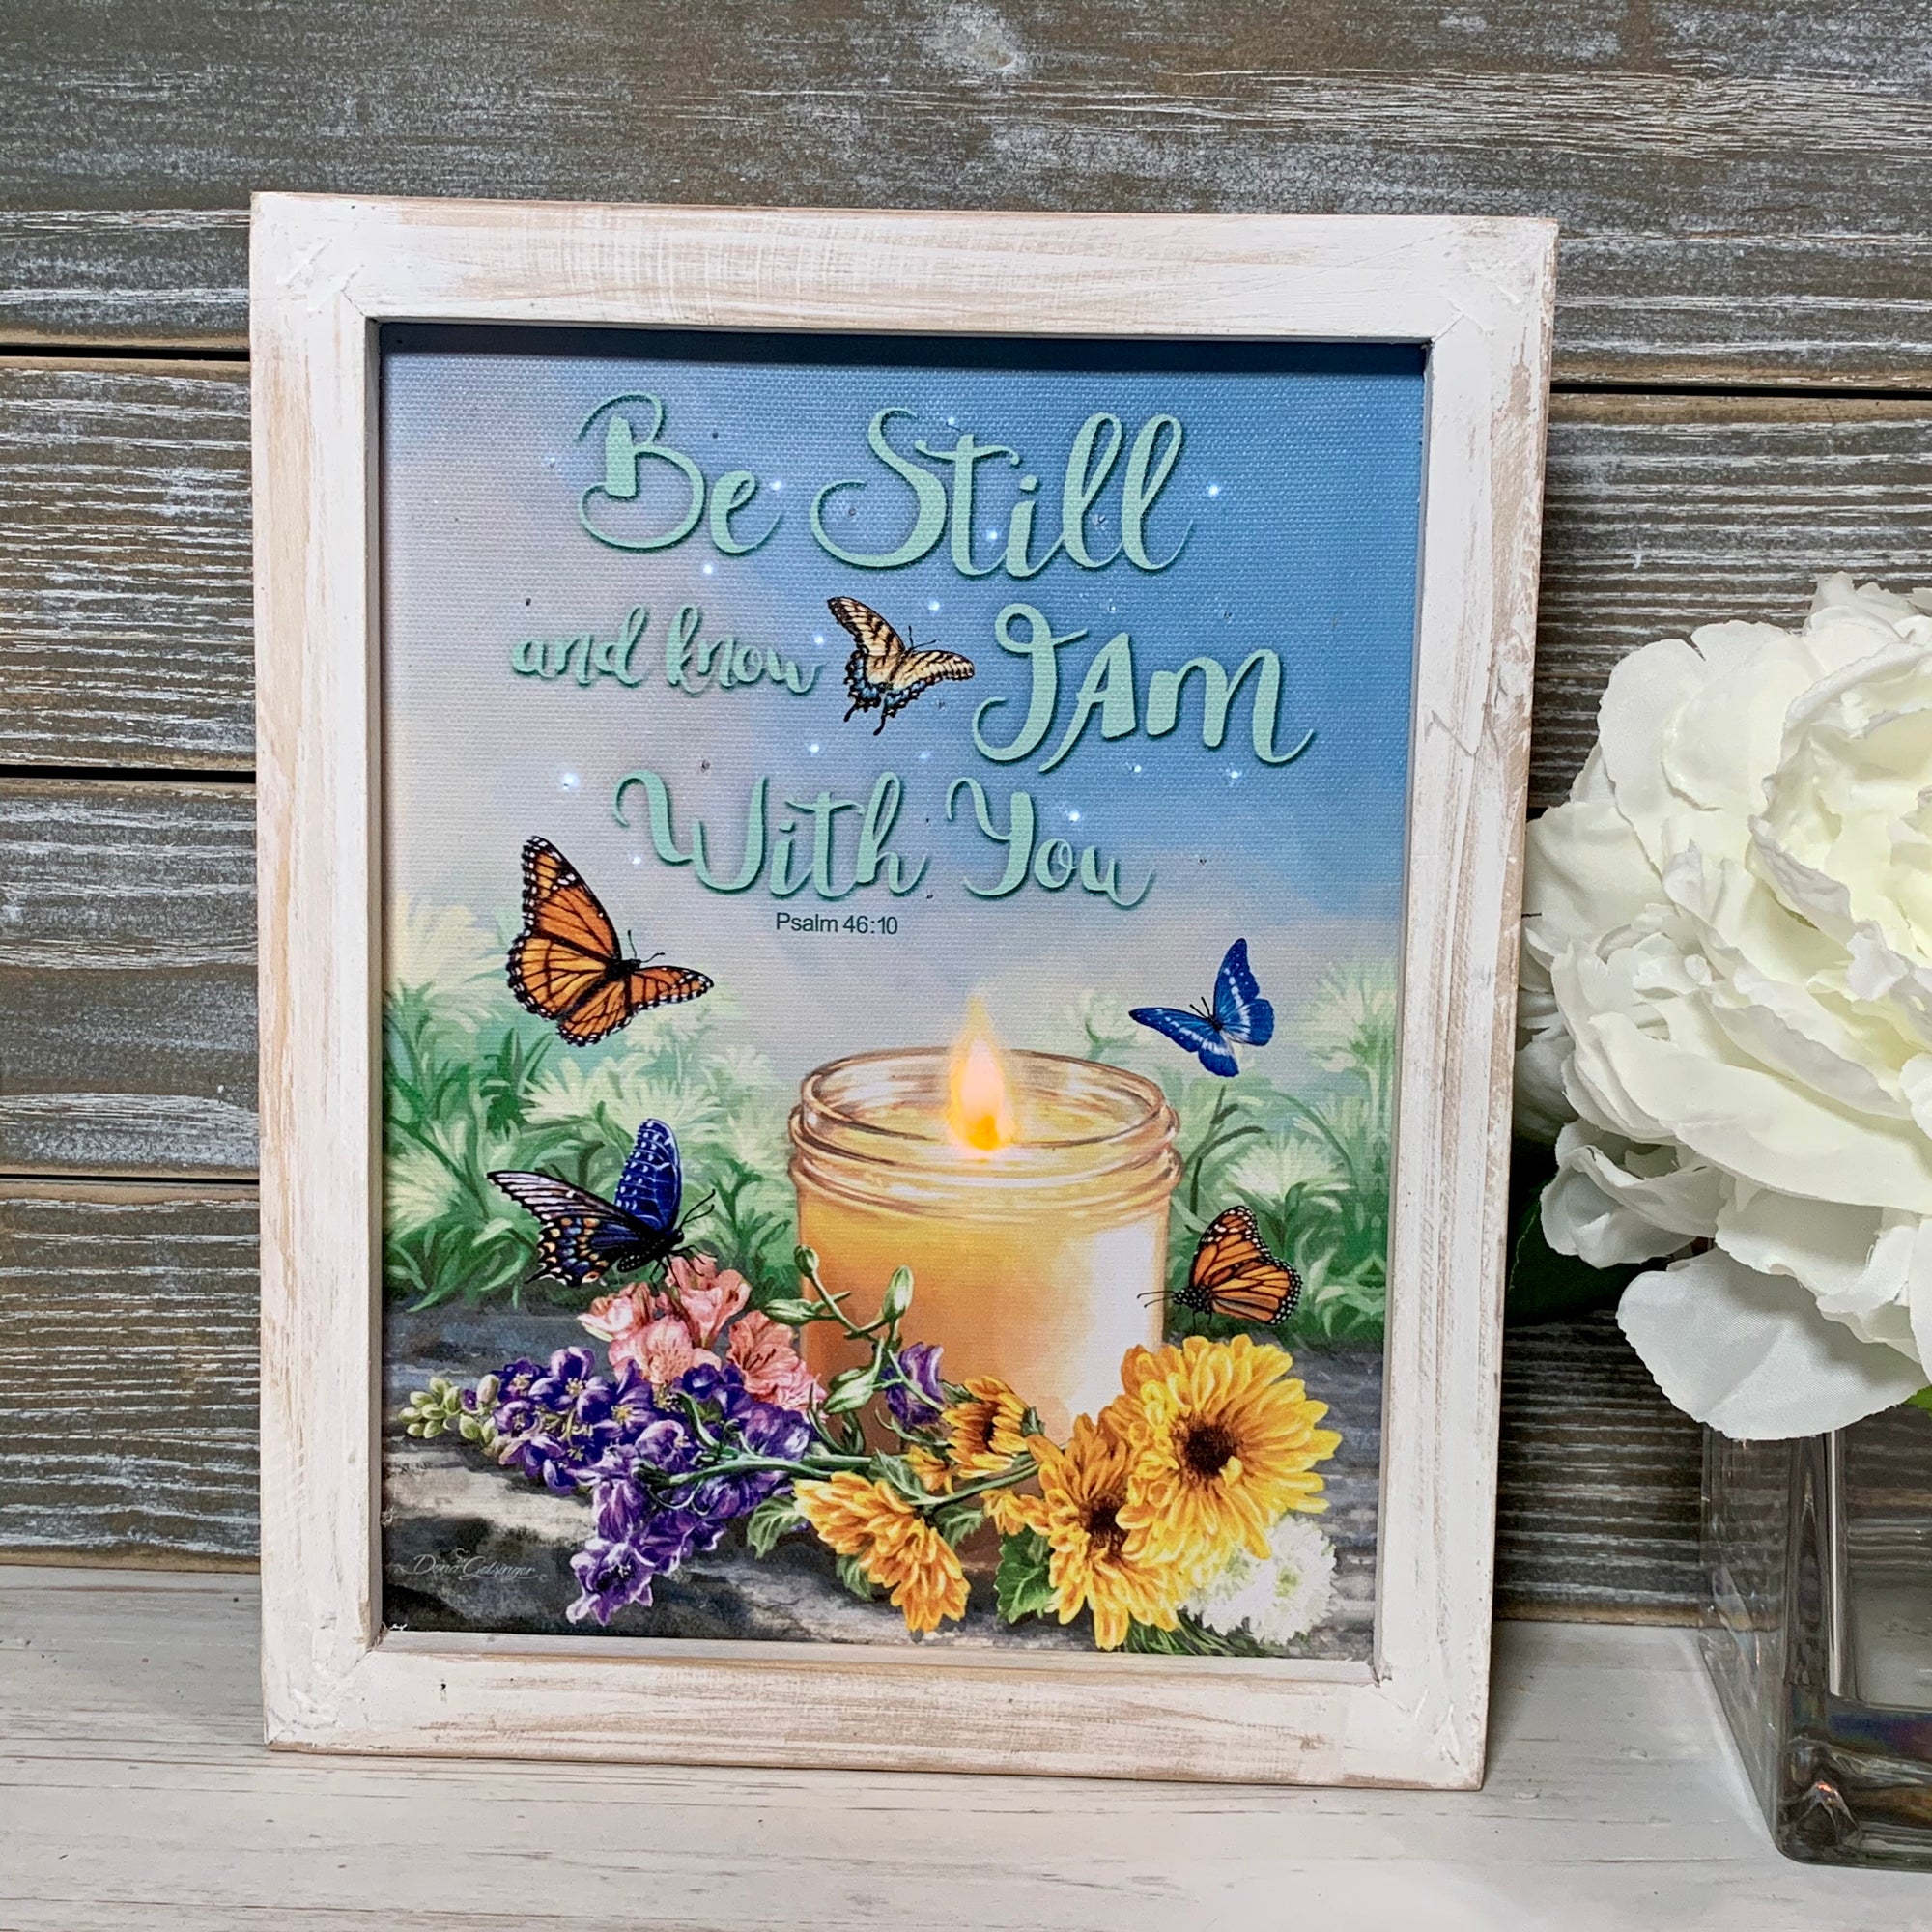 This beautiful candle, illuminated by gentle LED lights, casts a soft glow that adds an intimate and romantic ambiance to any room.  Surrounded by delicate flowers and fluttering butterflies, this shadow box is a symbol of new beginnings and the hope that love brings. And with the words of Psalm 46:10 written on the canvas, "Be still and know I am with you,"